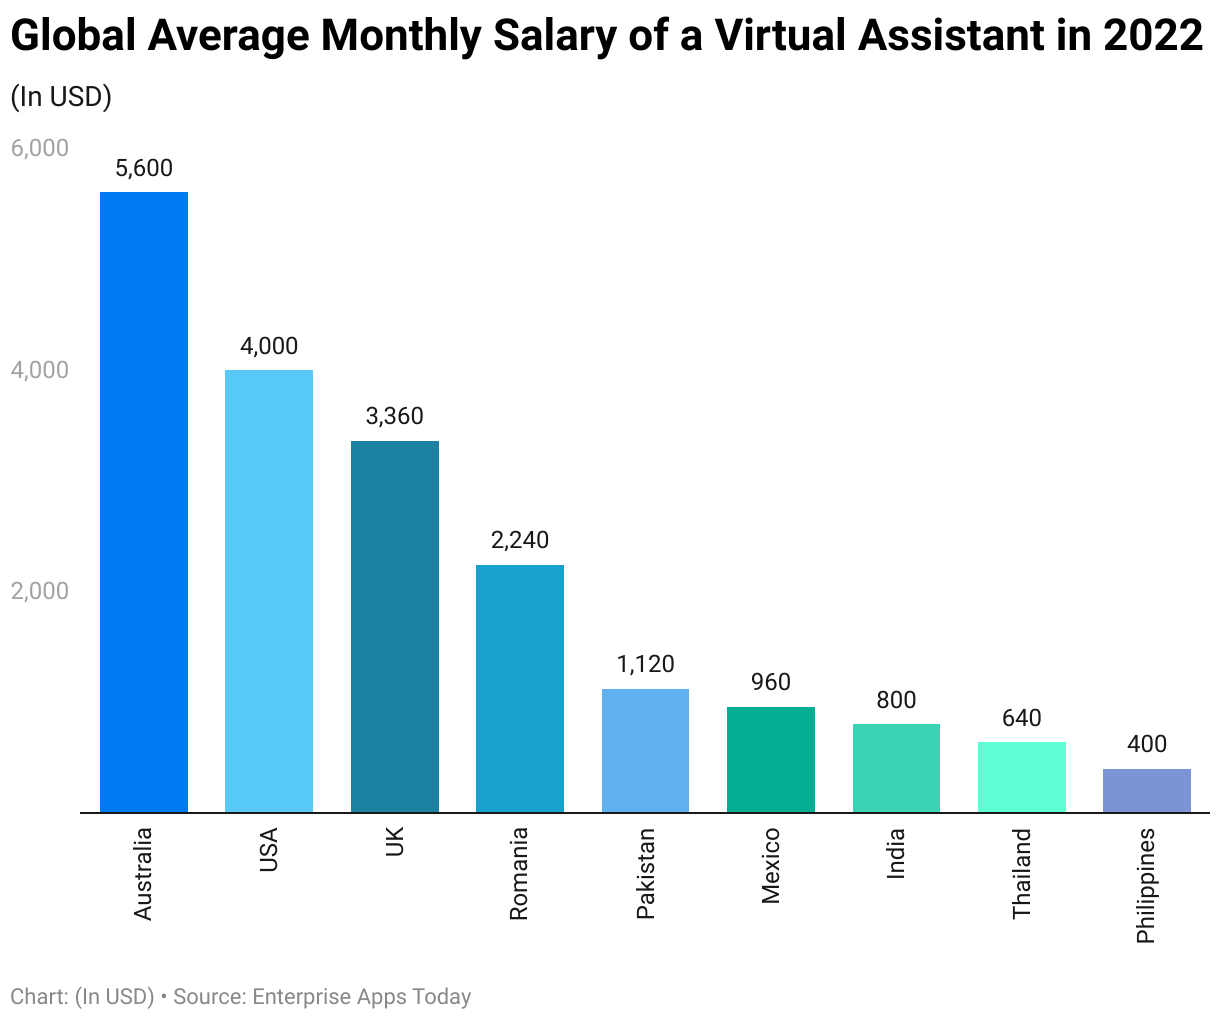 Global Average Monthly Salary of a Virtual Assistant in 2022 